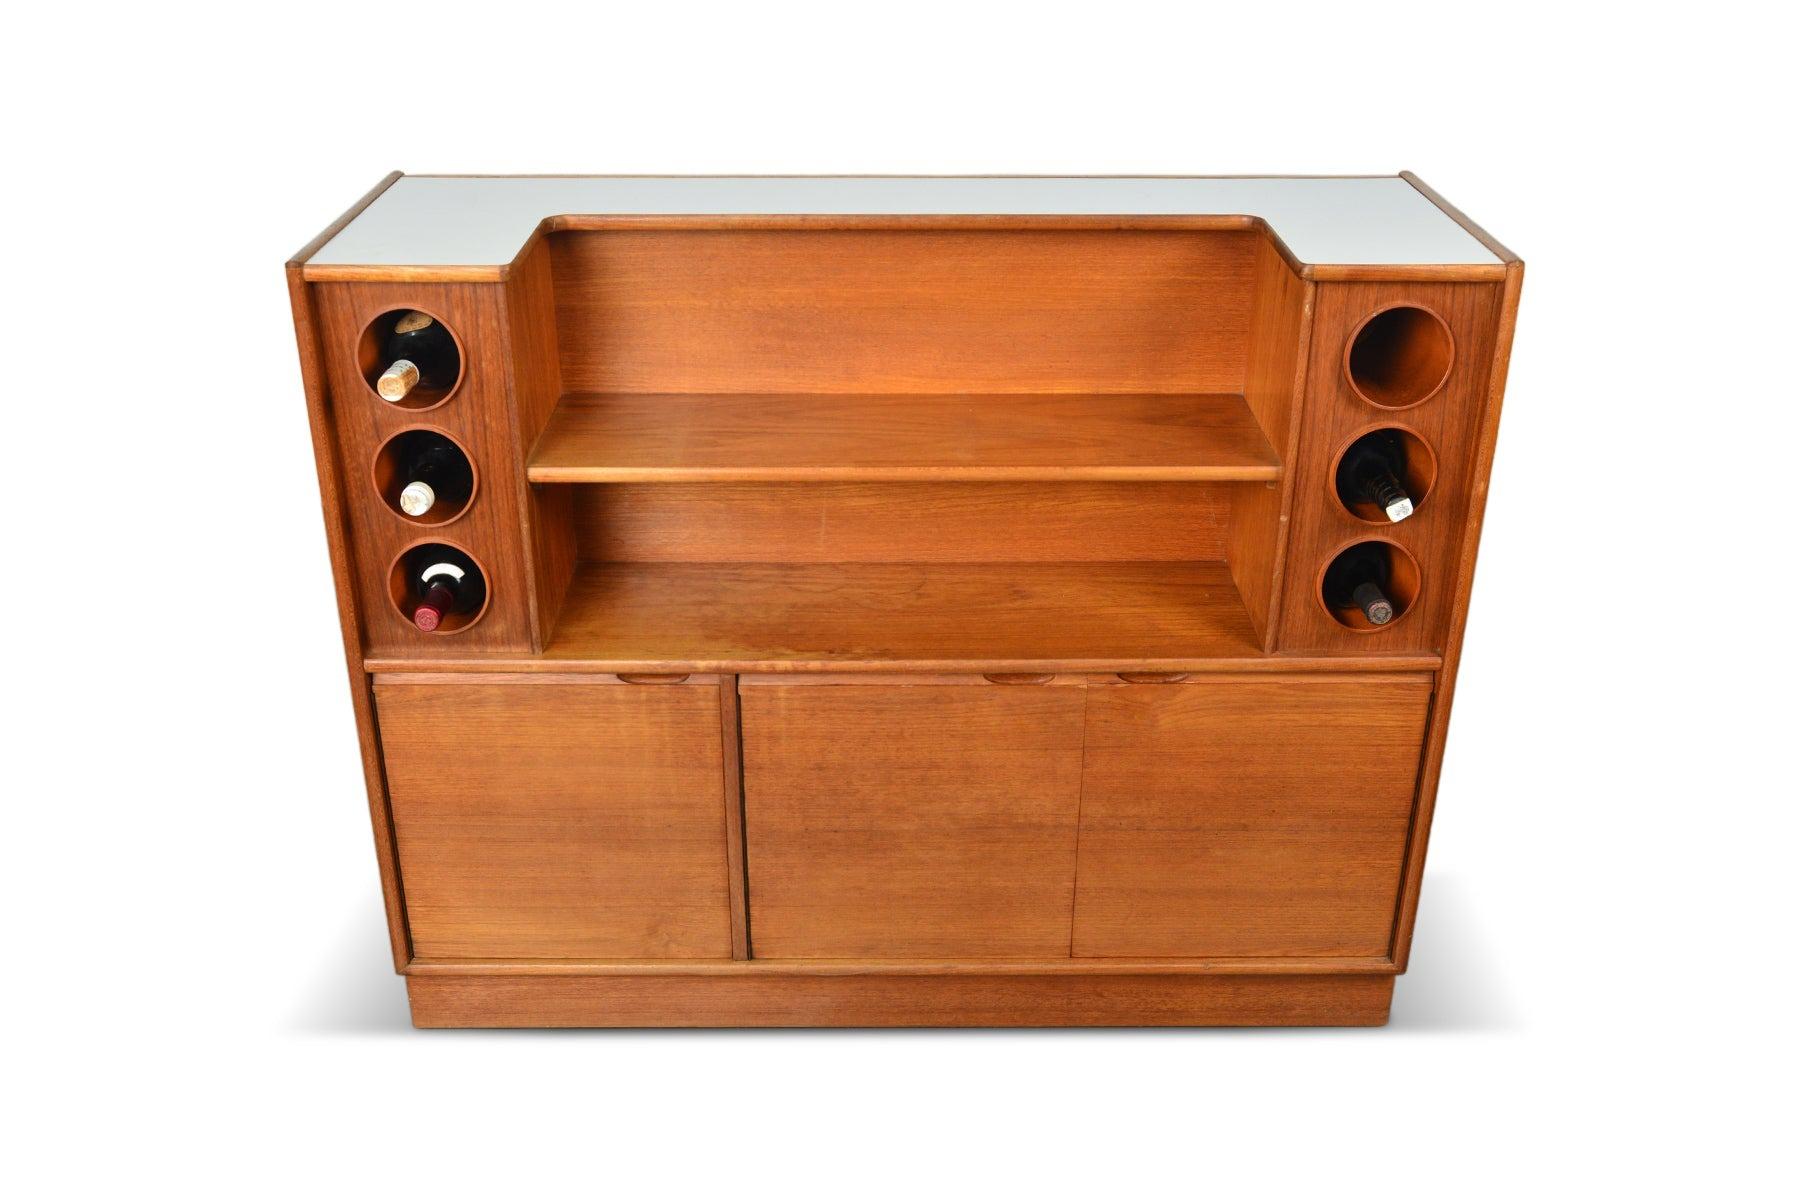 Freestanding Teak Cocktail Bar With White Laminate Top In Good Condition For Sale In Berkeley, CA